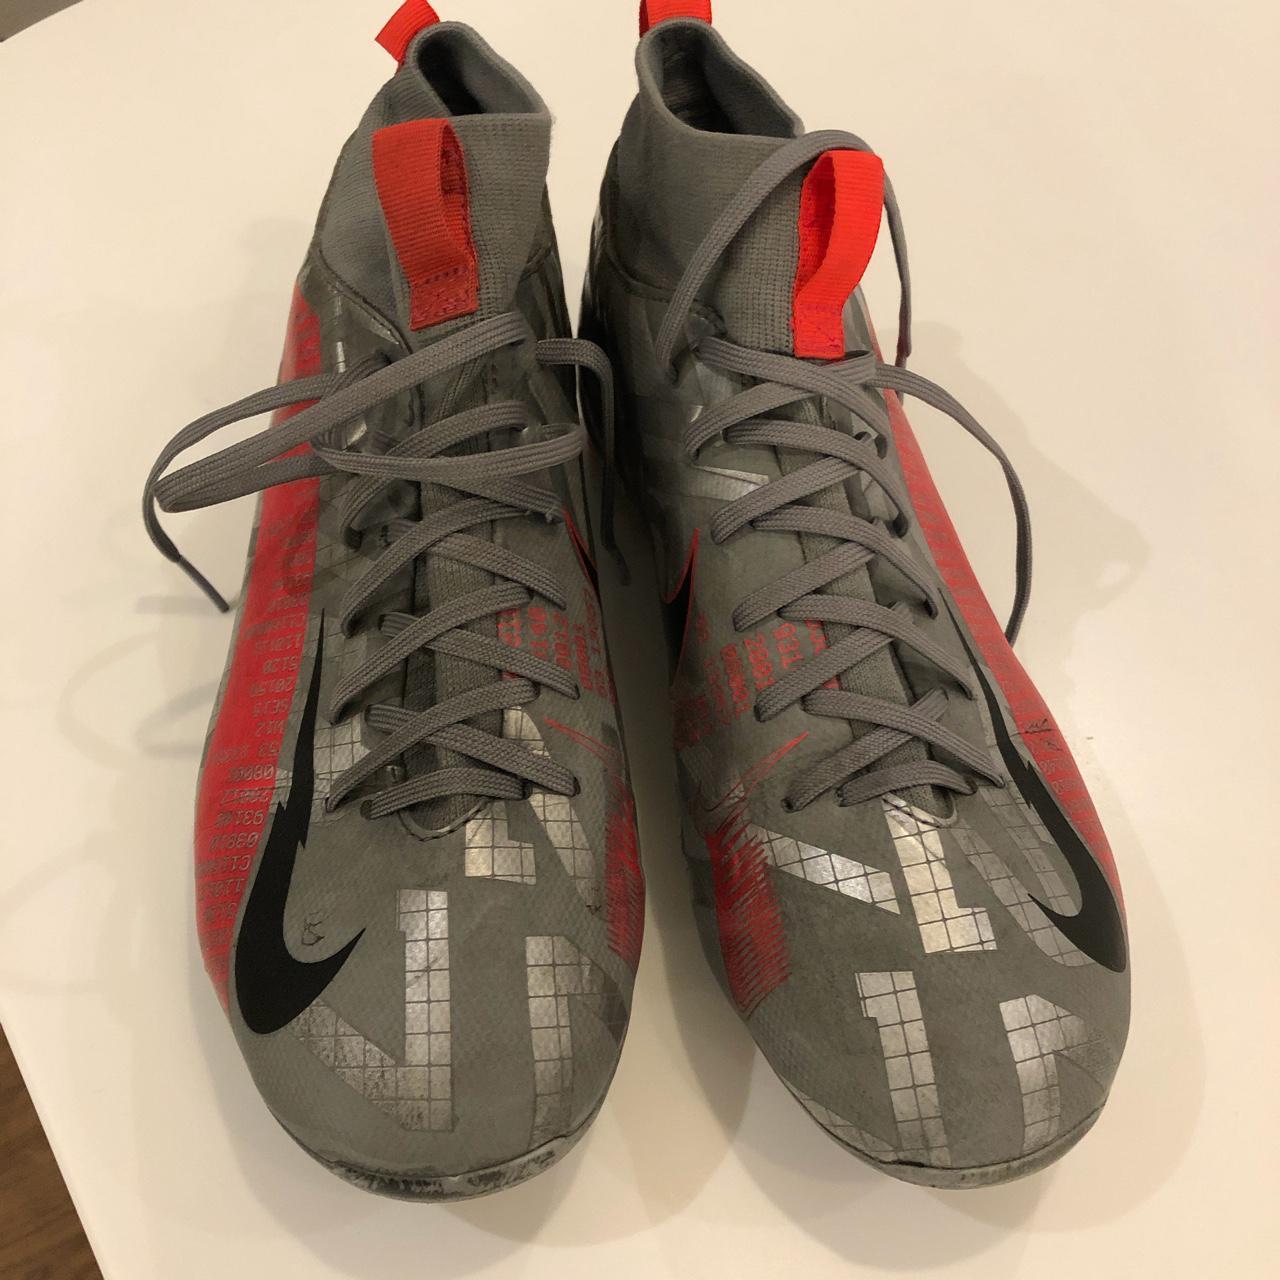 Product Image 1 - Nike mercurial football boots size